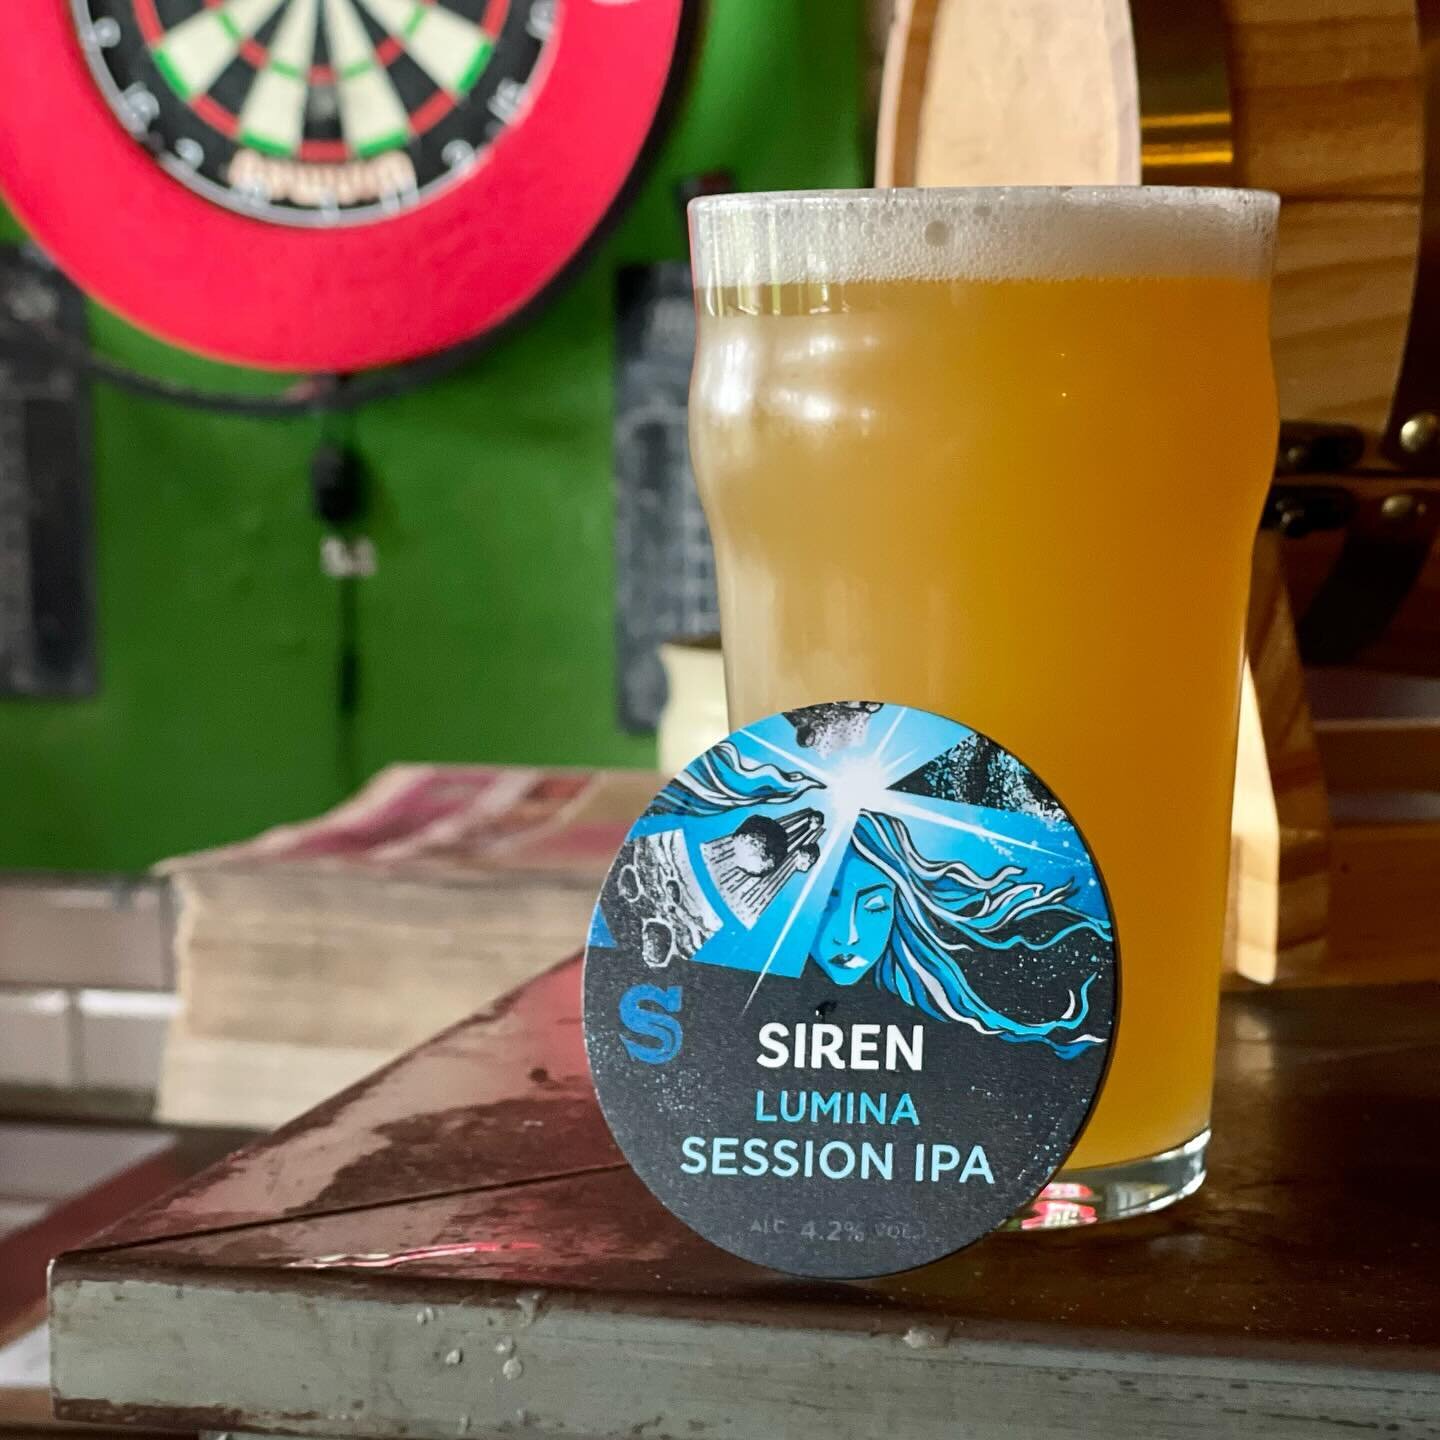 It might not be summer yet, but this session IPA from Siren is sunshine in a glass. Juicy, tropical, and gluten free to boot, it&rsquo;s the perfect cure for the grim weather. Now a permanent fixture on draught! #craftbeer #hackneywick #ipa #hereeast